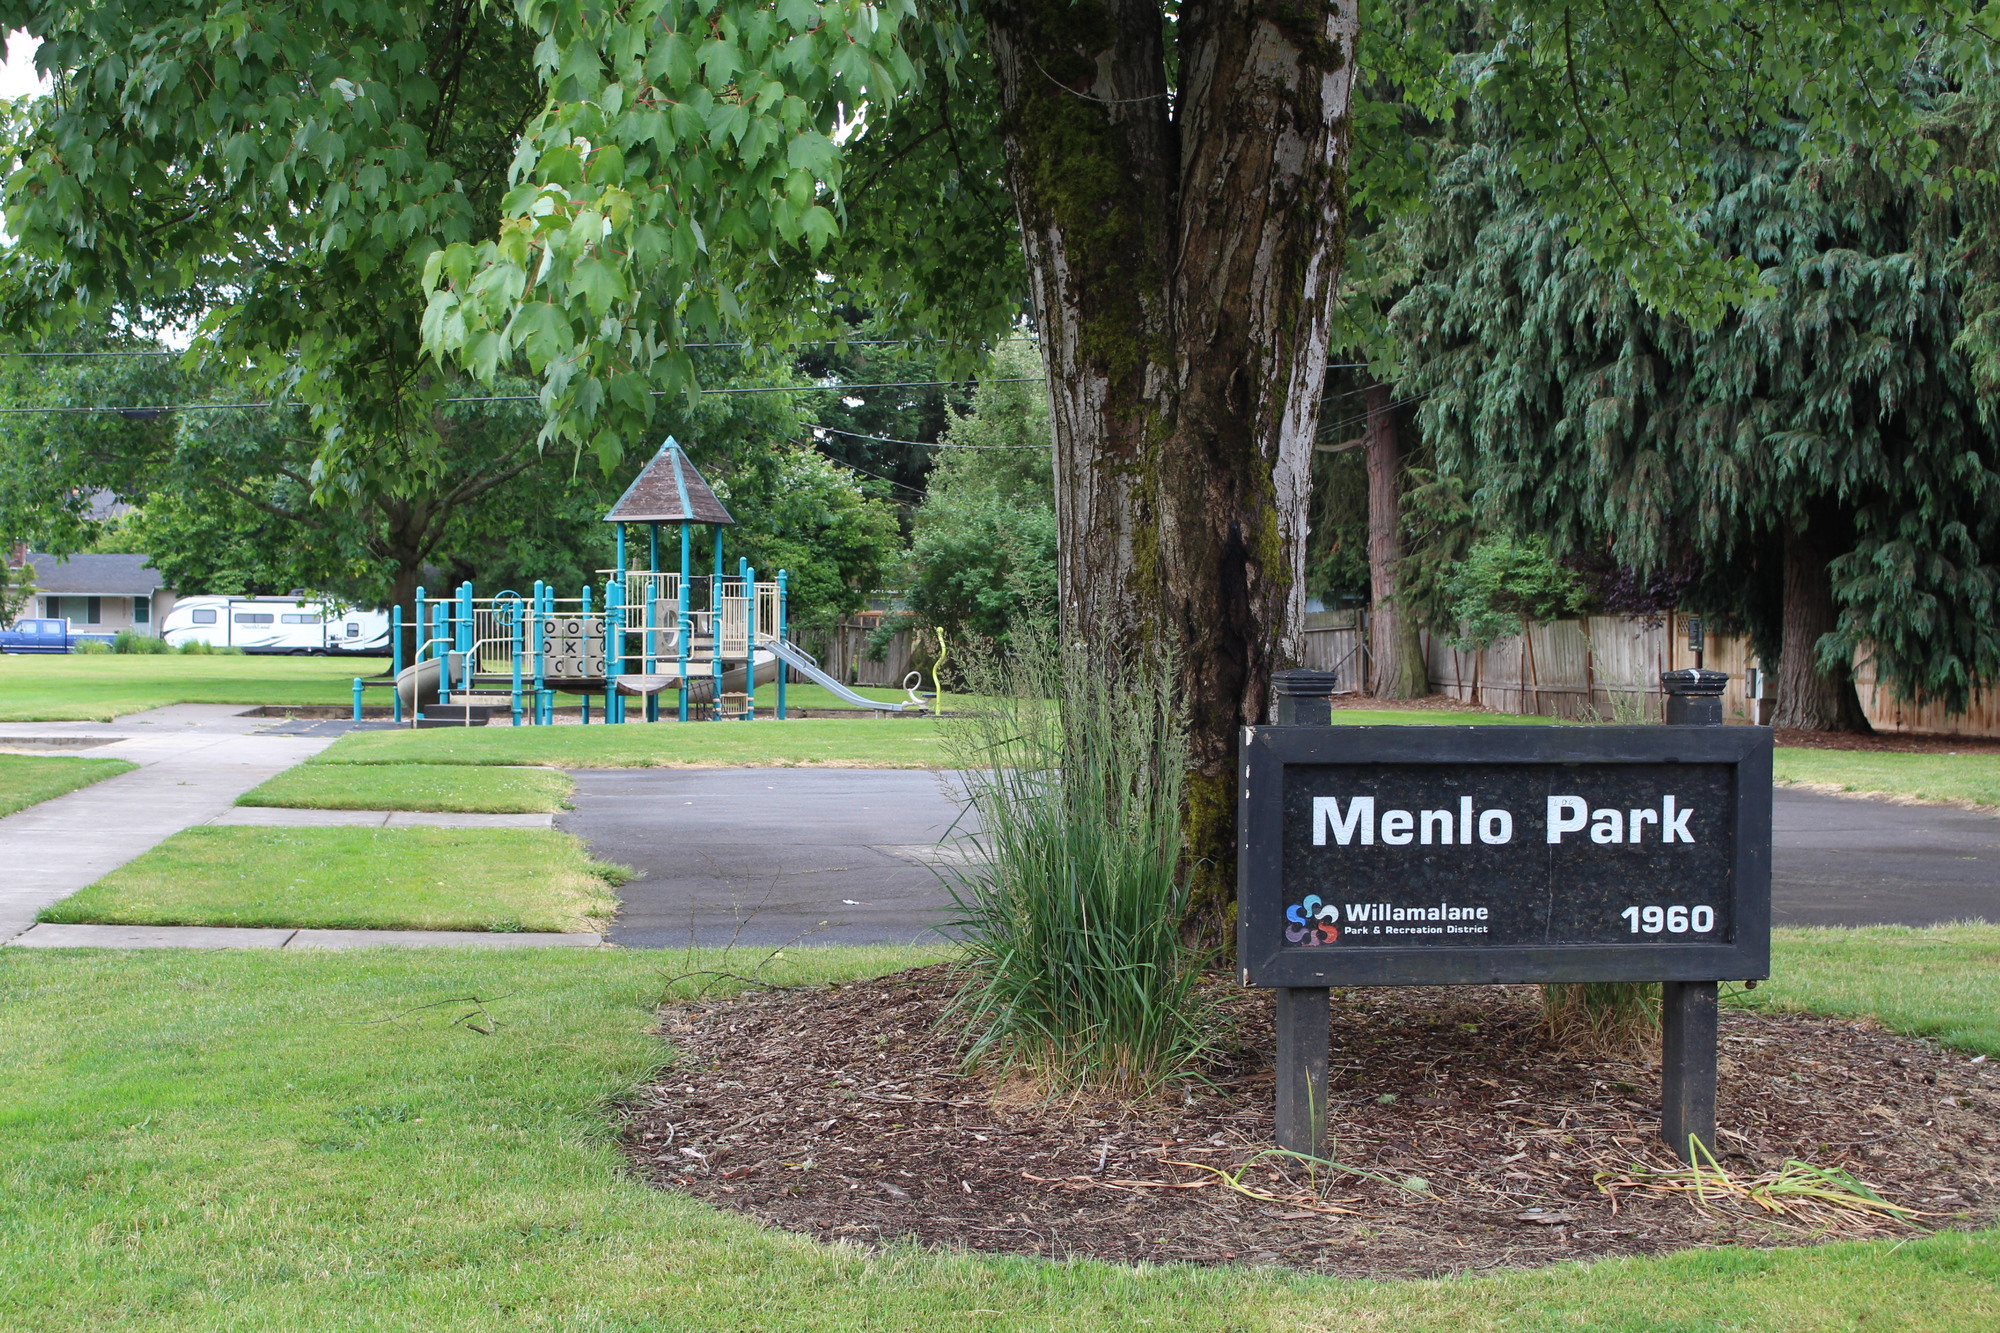 playground and basketball court with a park sign reading "Menlo Park"